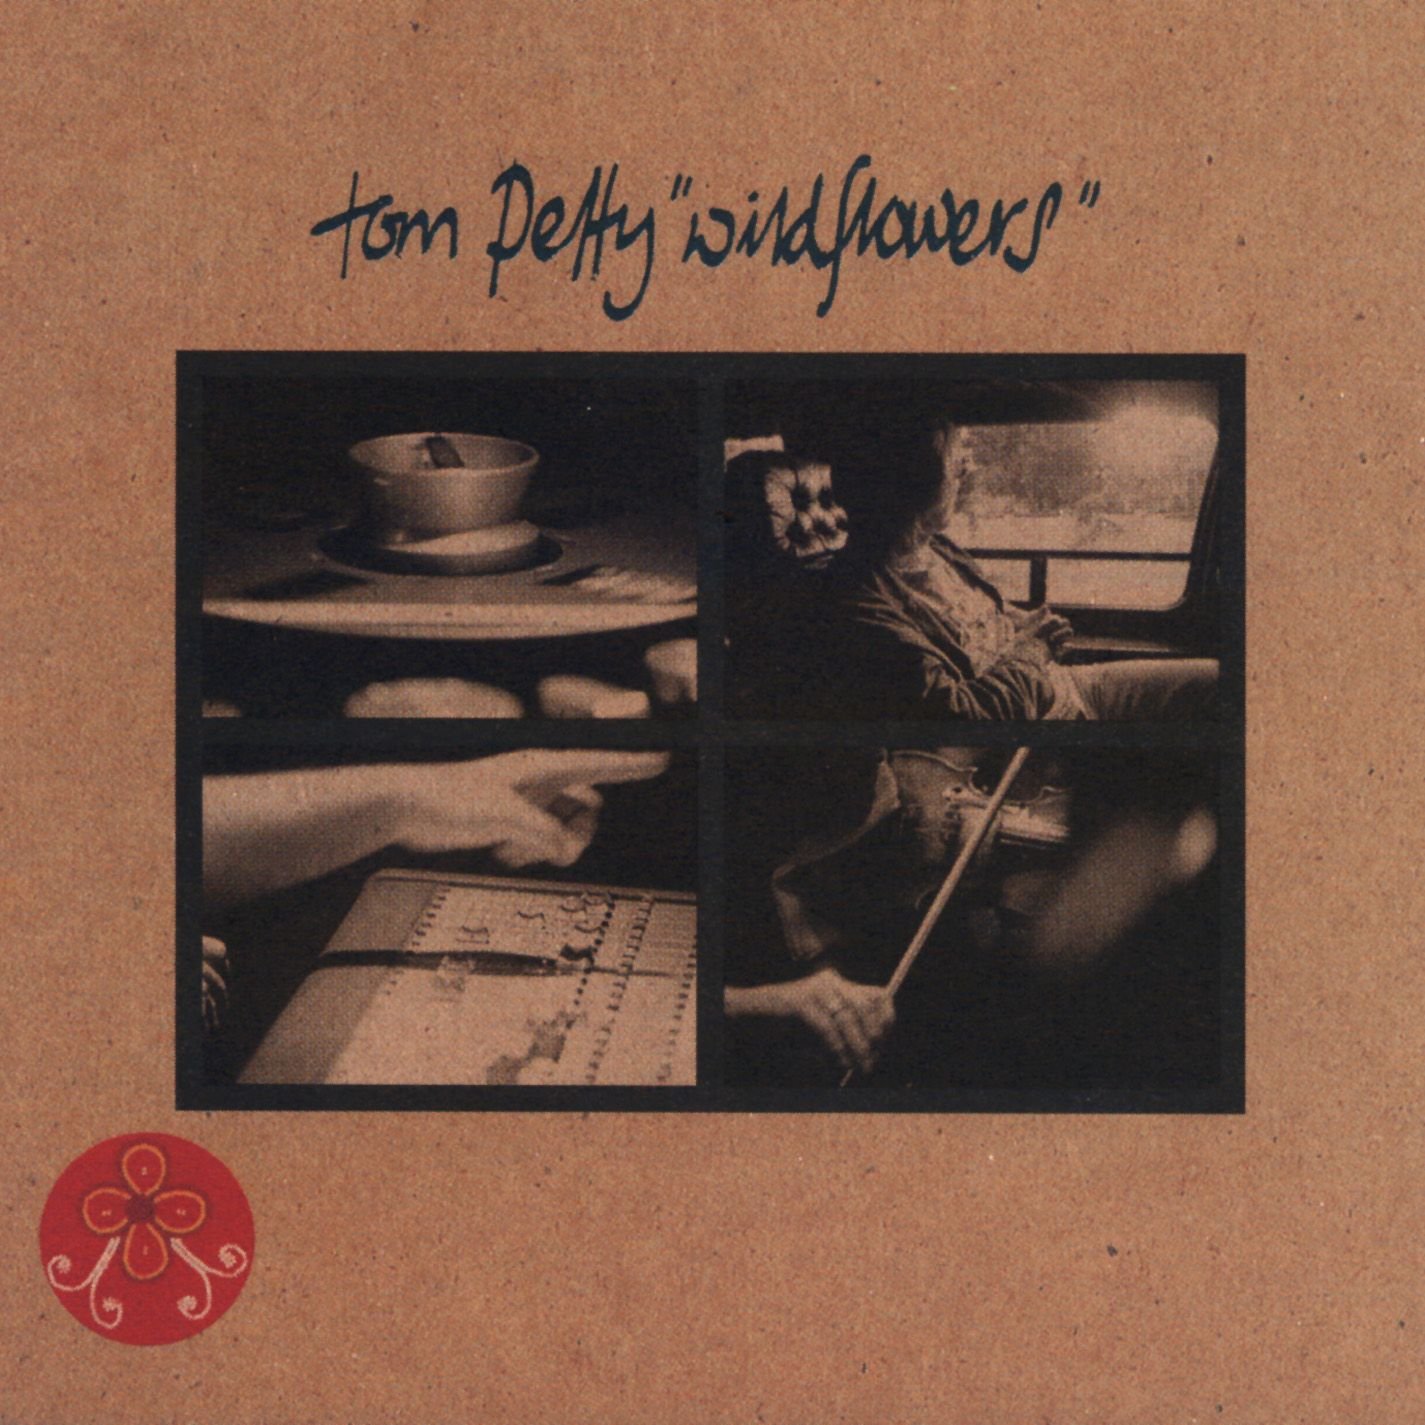 Great B-sides: Girl on LSD by Tom Petty